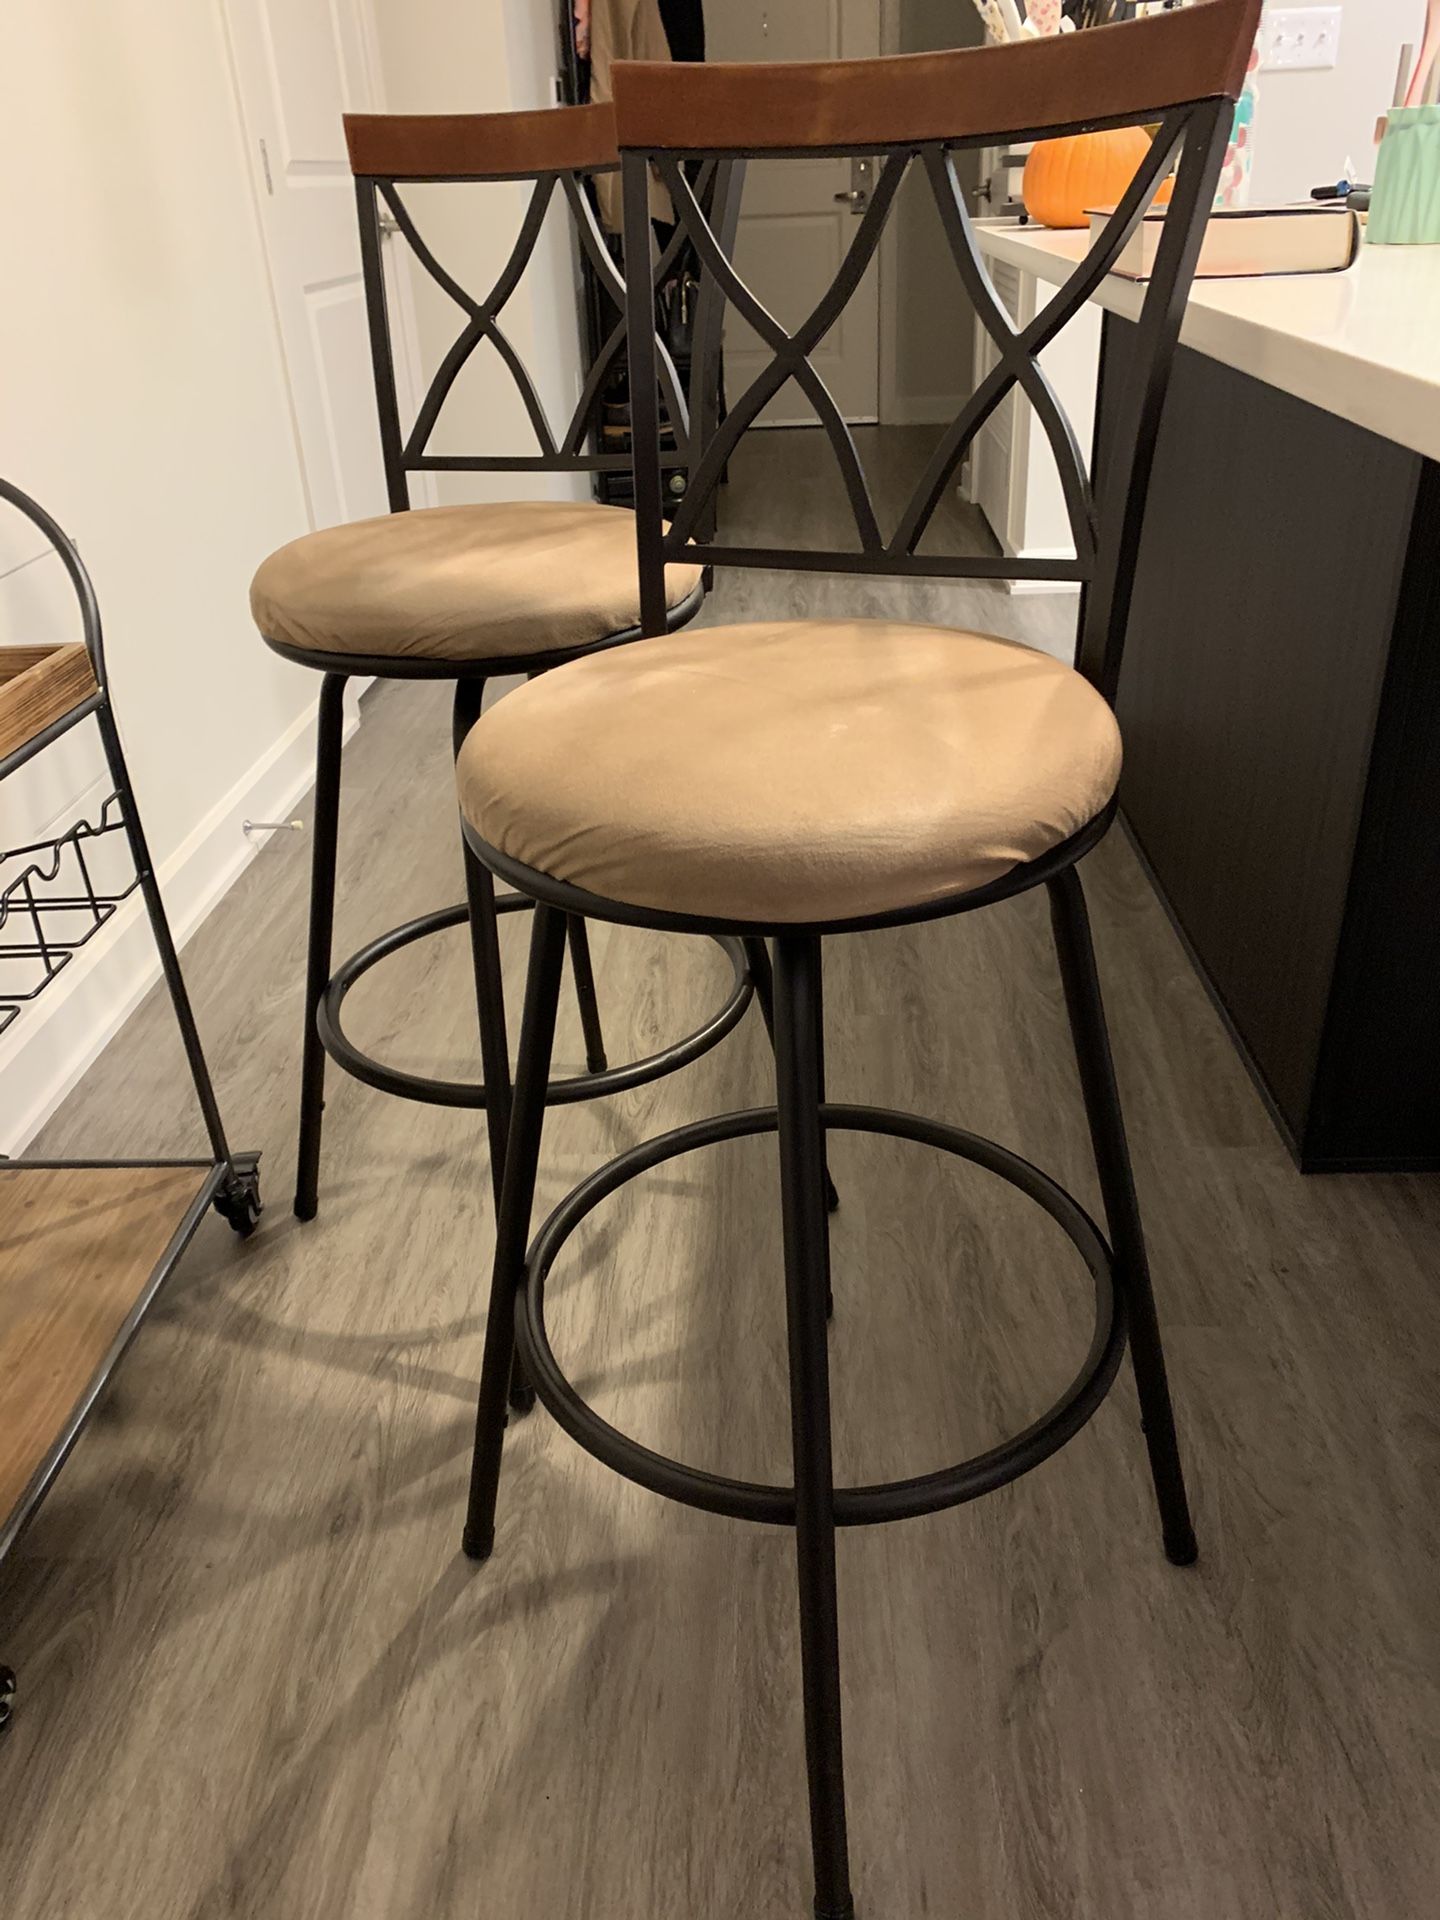 Bar stools with adjustable height